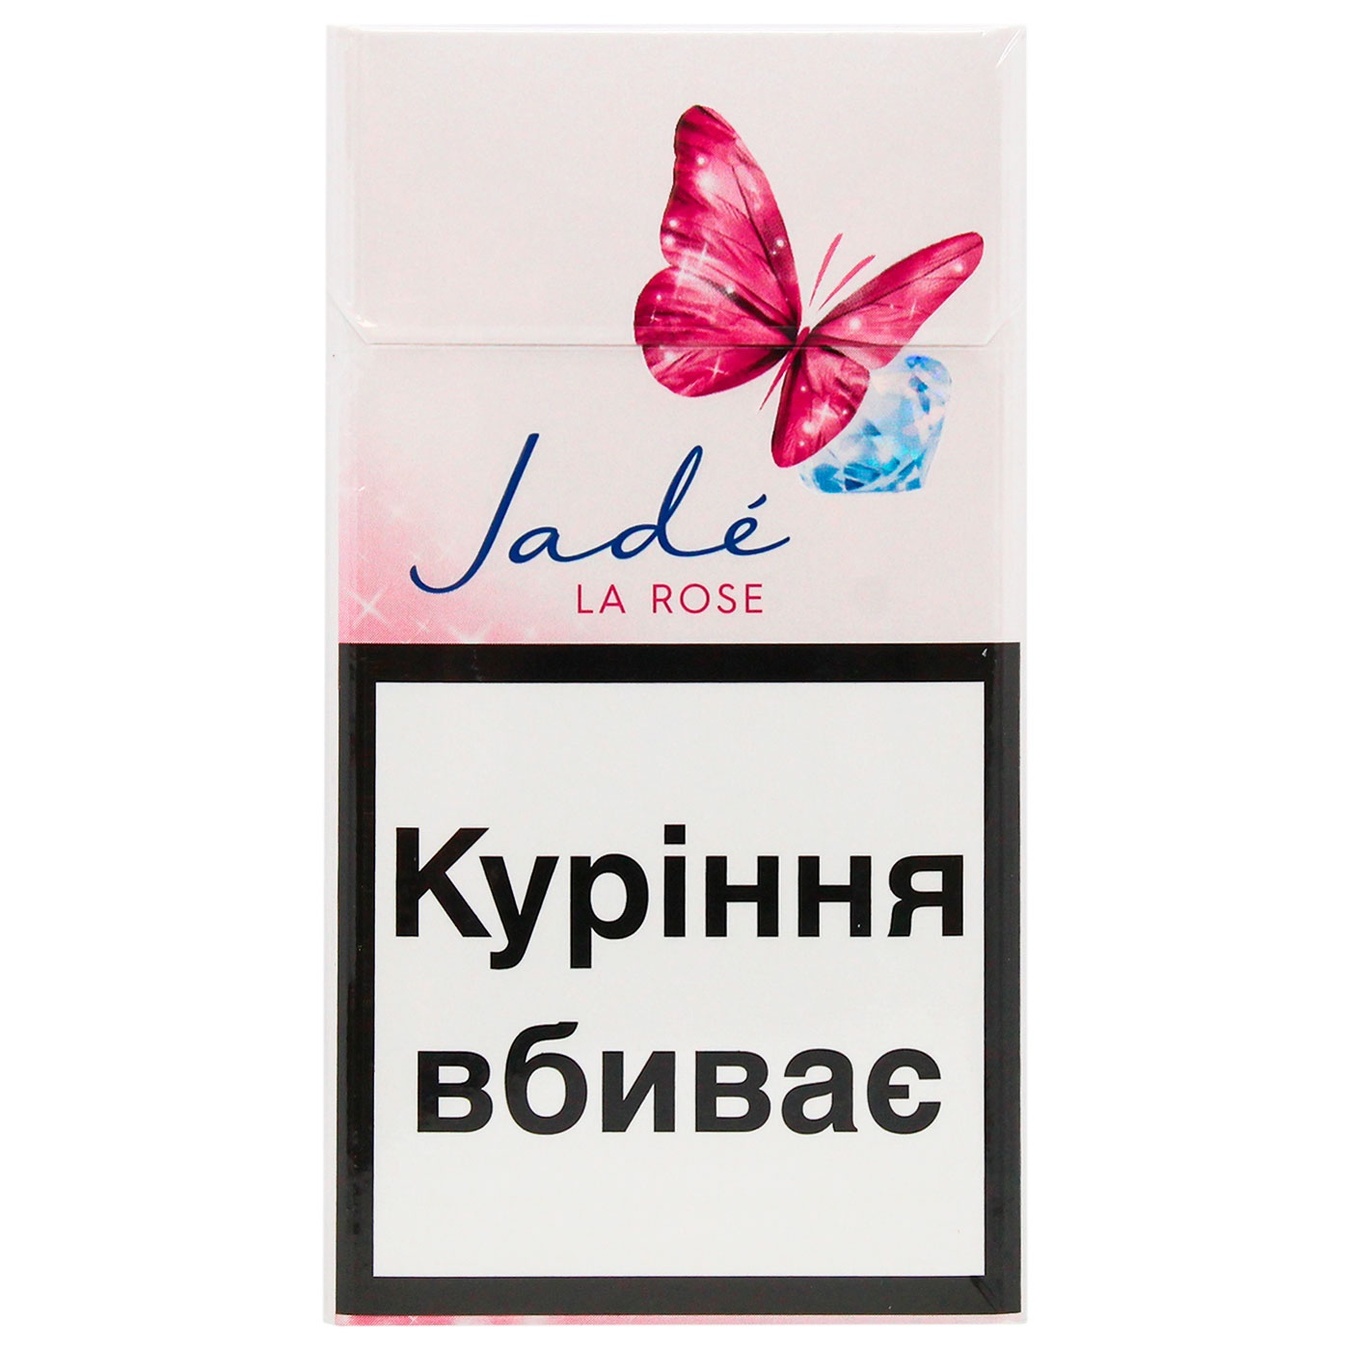 Jade La Rose Superslims cigarettes (the price is indicated without excise duty)